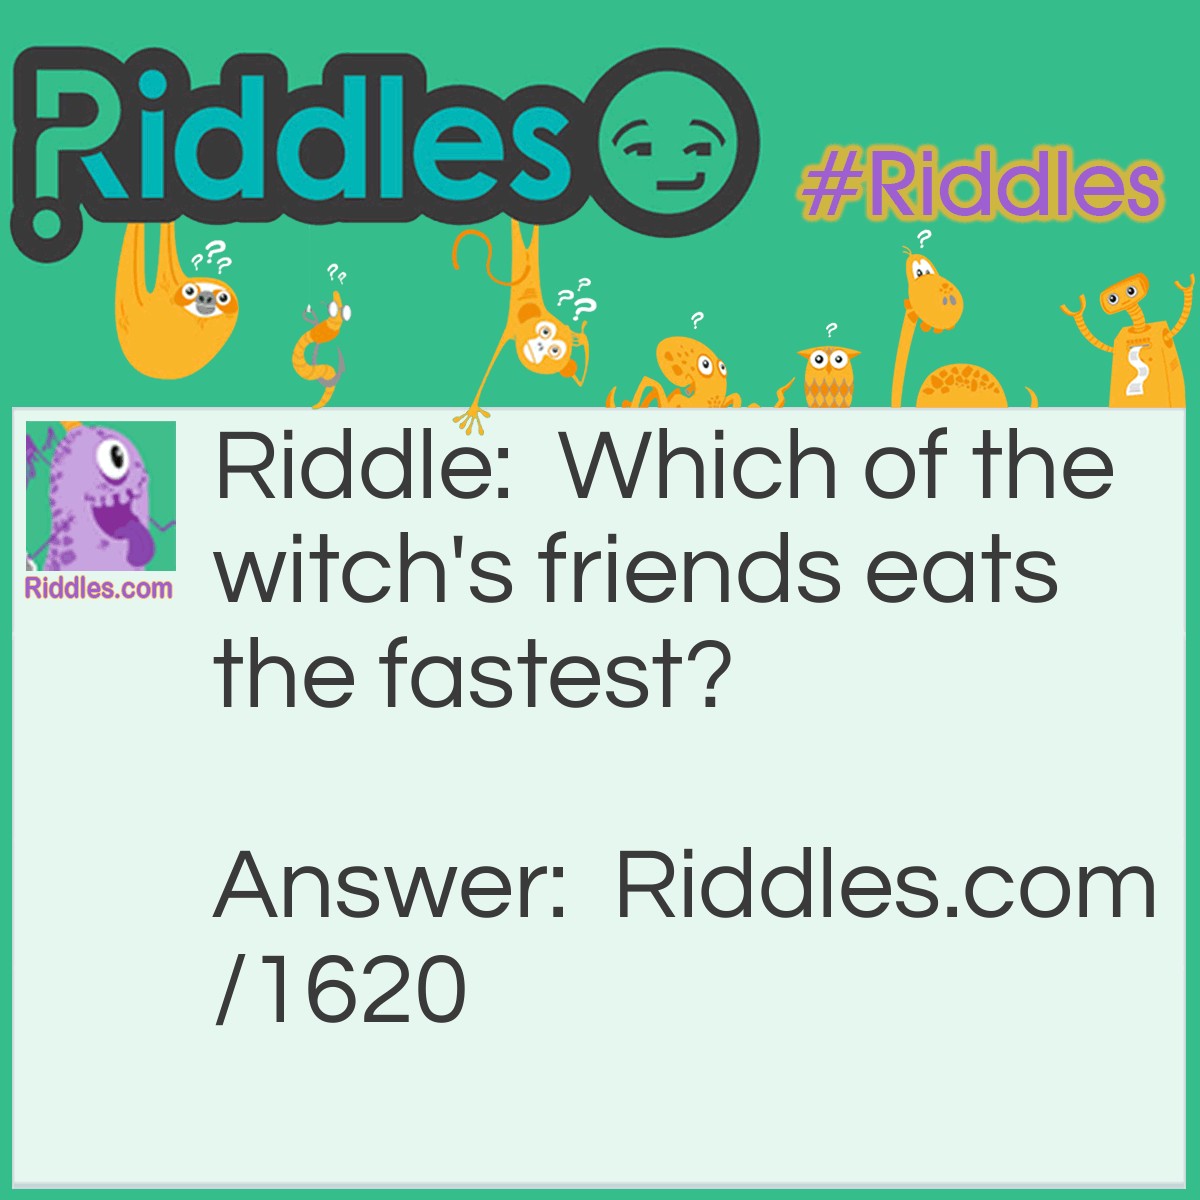 Riddle: Which of the witch's friends eats the fastest? Answer: The goblin.